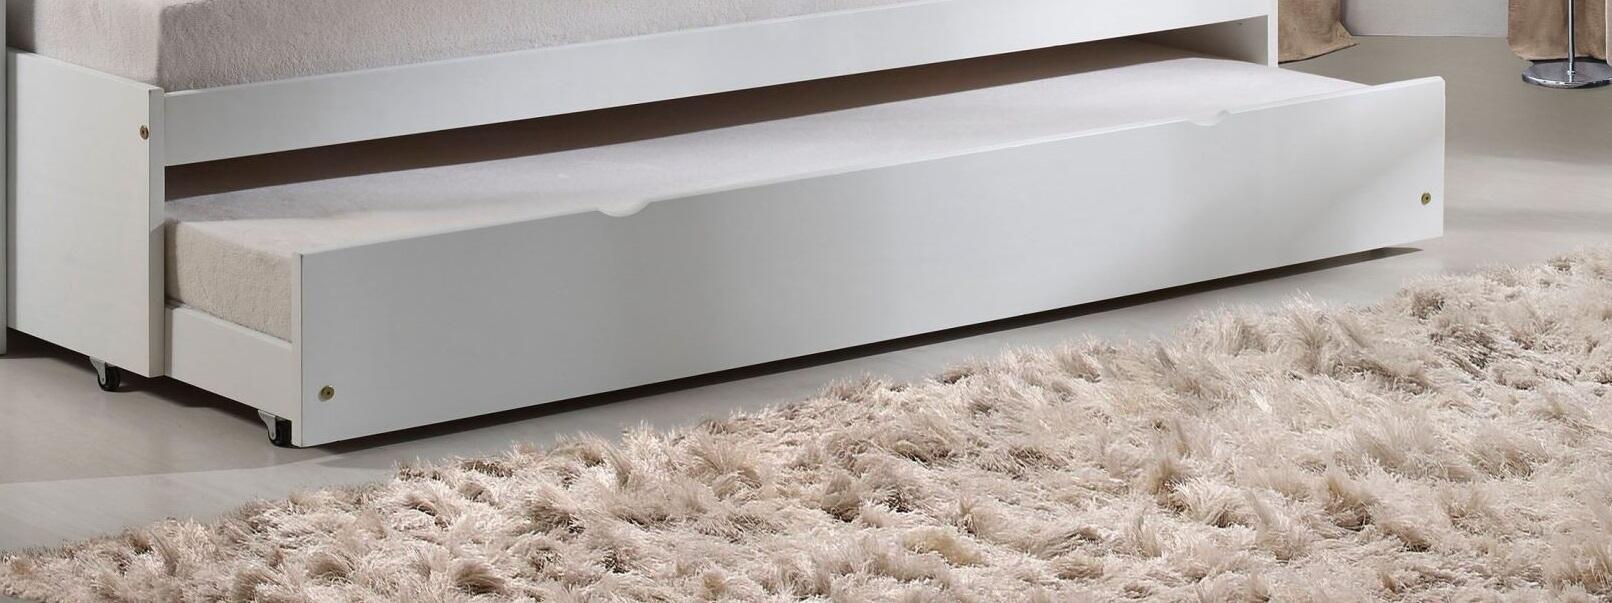 ACME Cominia Daybed  Trundles in White-Boyel Living